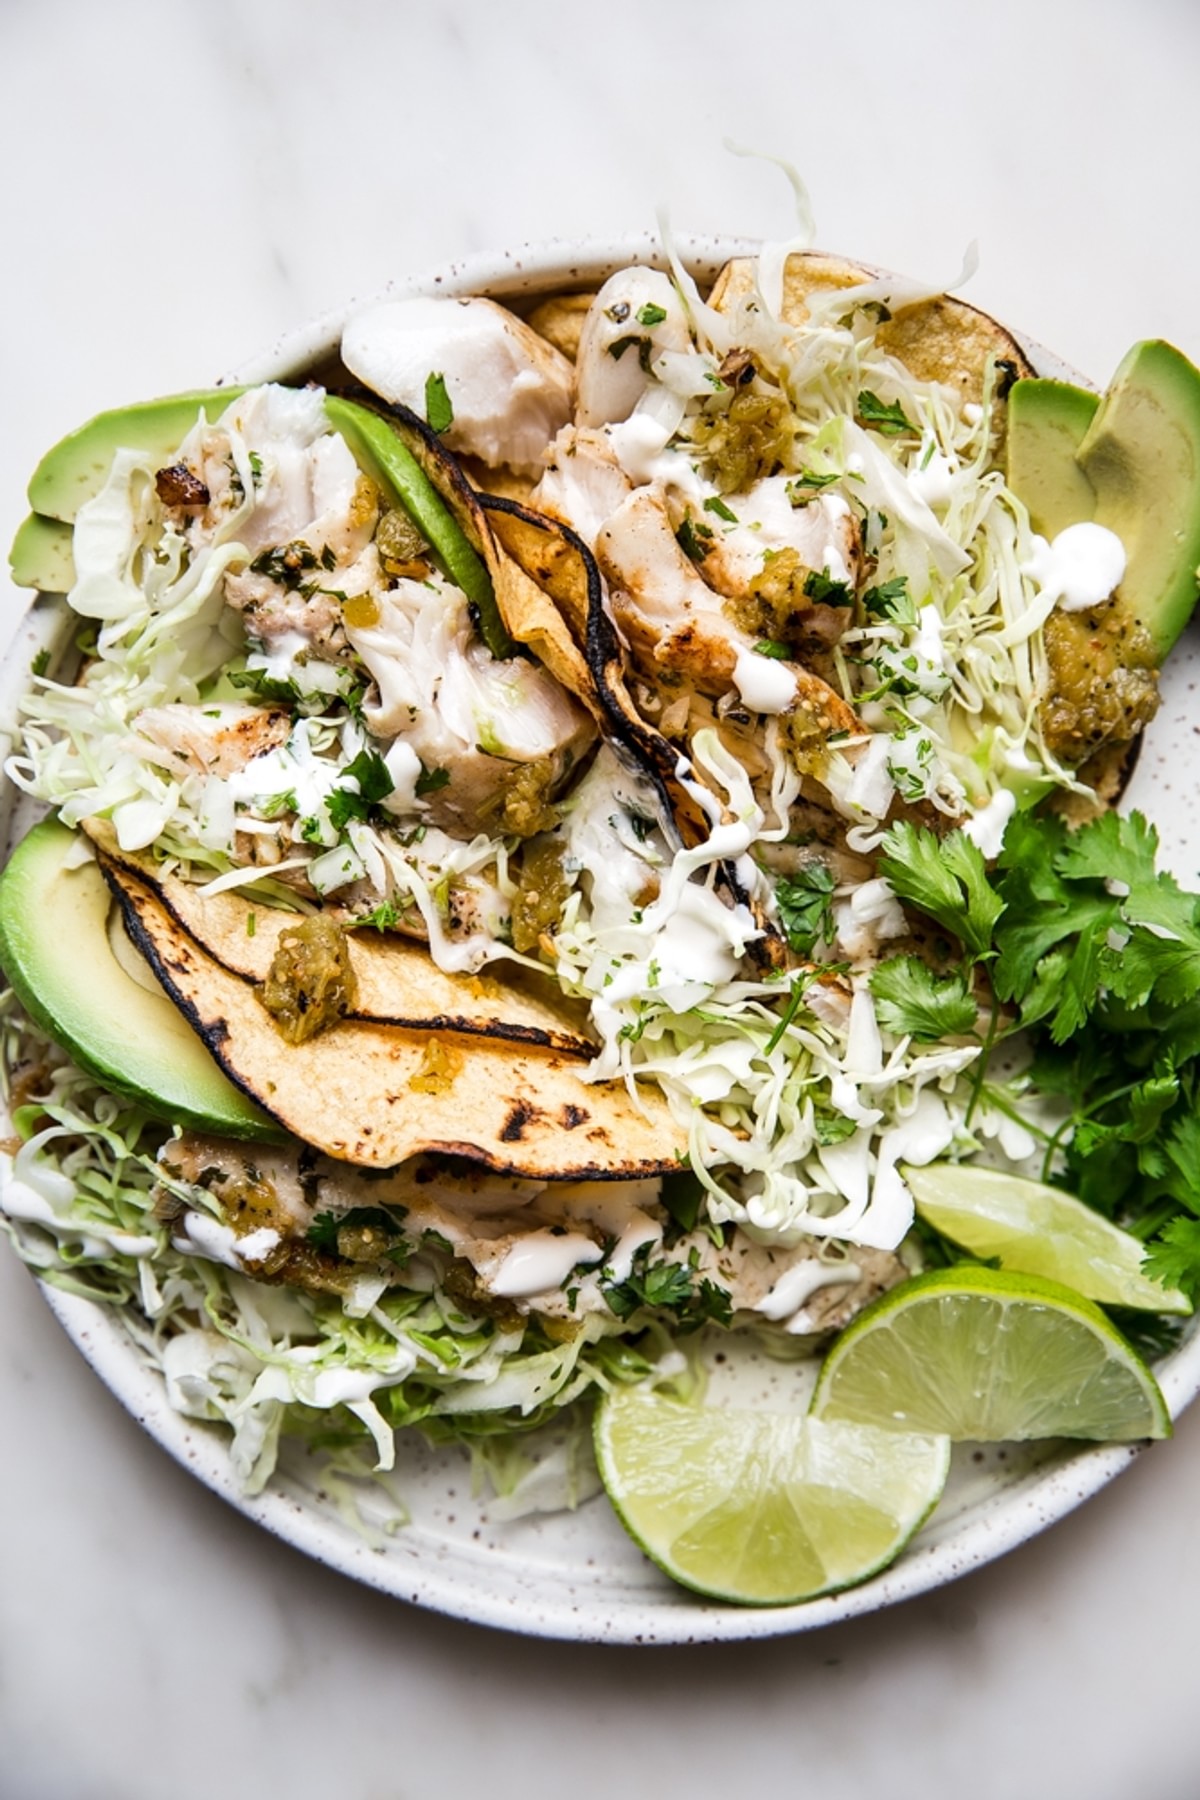 Grilled Tilapia Tacos on a plate with cabbage, limes and avocado